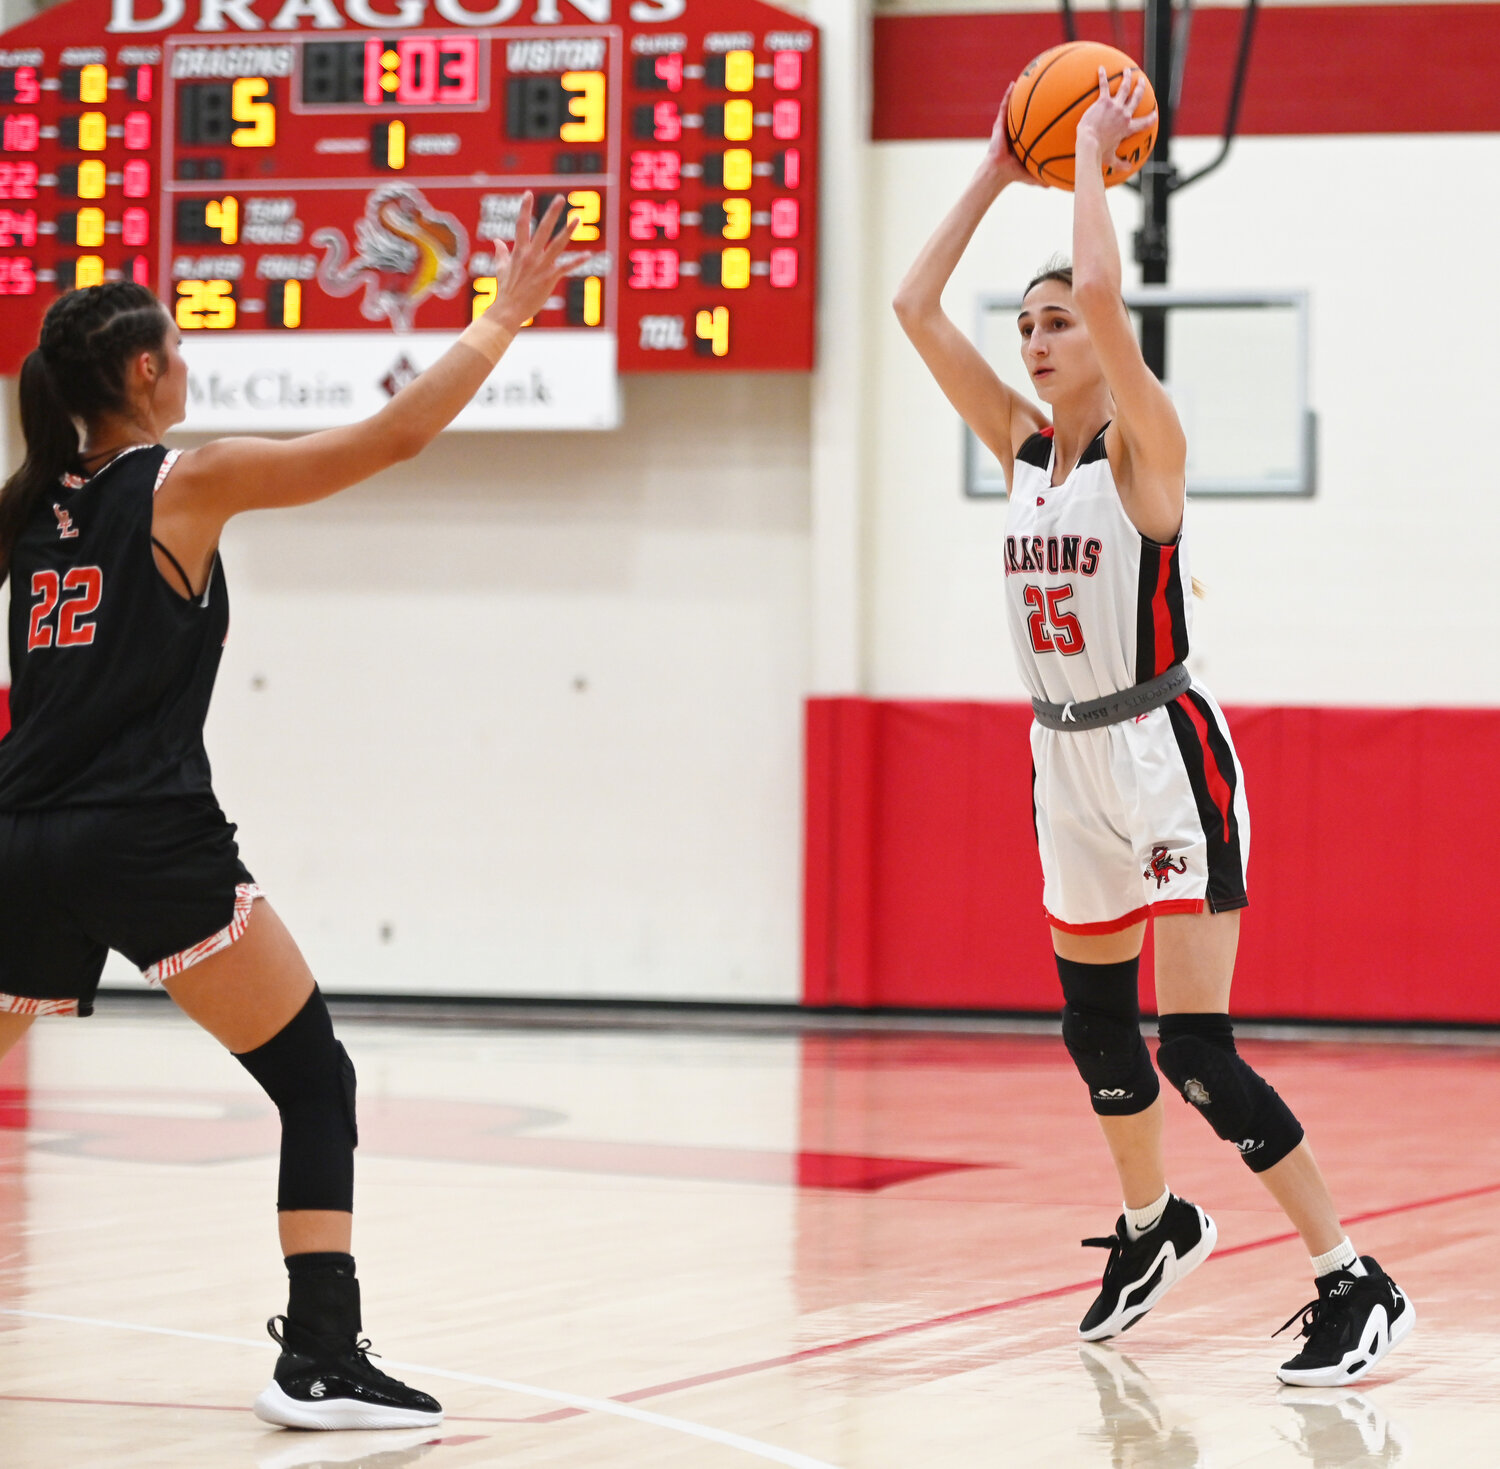 Purcell senior Alyssa Thompson feeds the ball into the post during the Dragons’ 50-29 win over the Leopards. Thompson scored three points in the game.